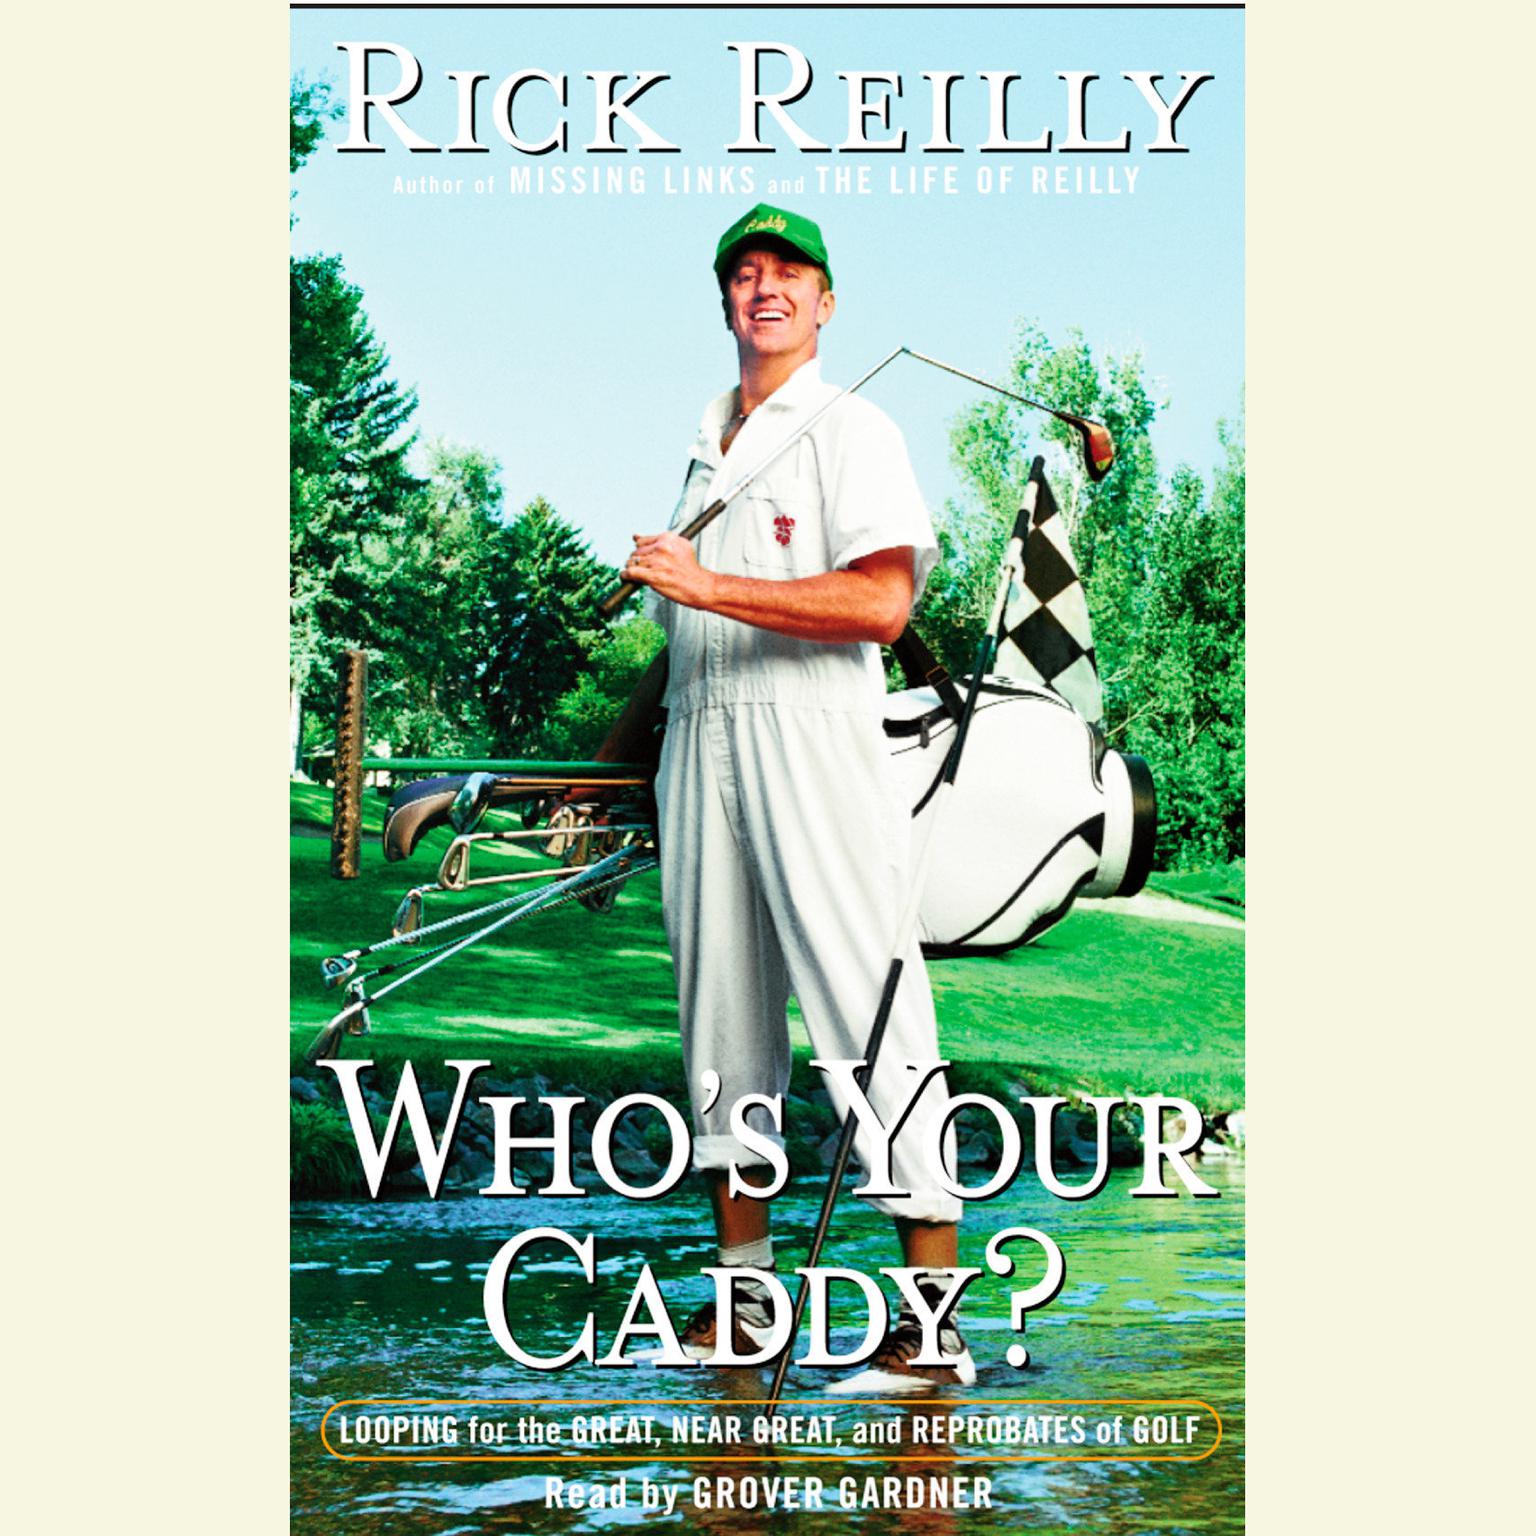 Whos Your Caddy? (Abridged): Looping for the Great, Near Great, and Reprobates of Golf Audiobook, by Rick Reilly